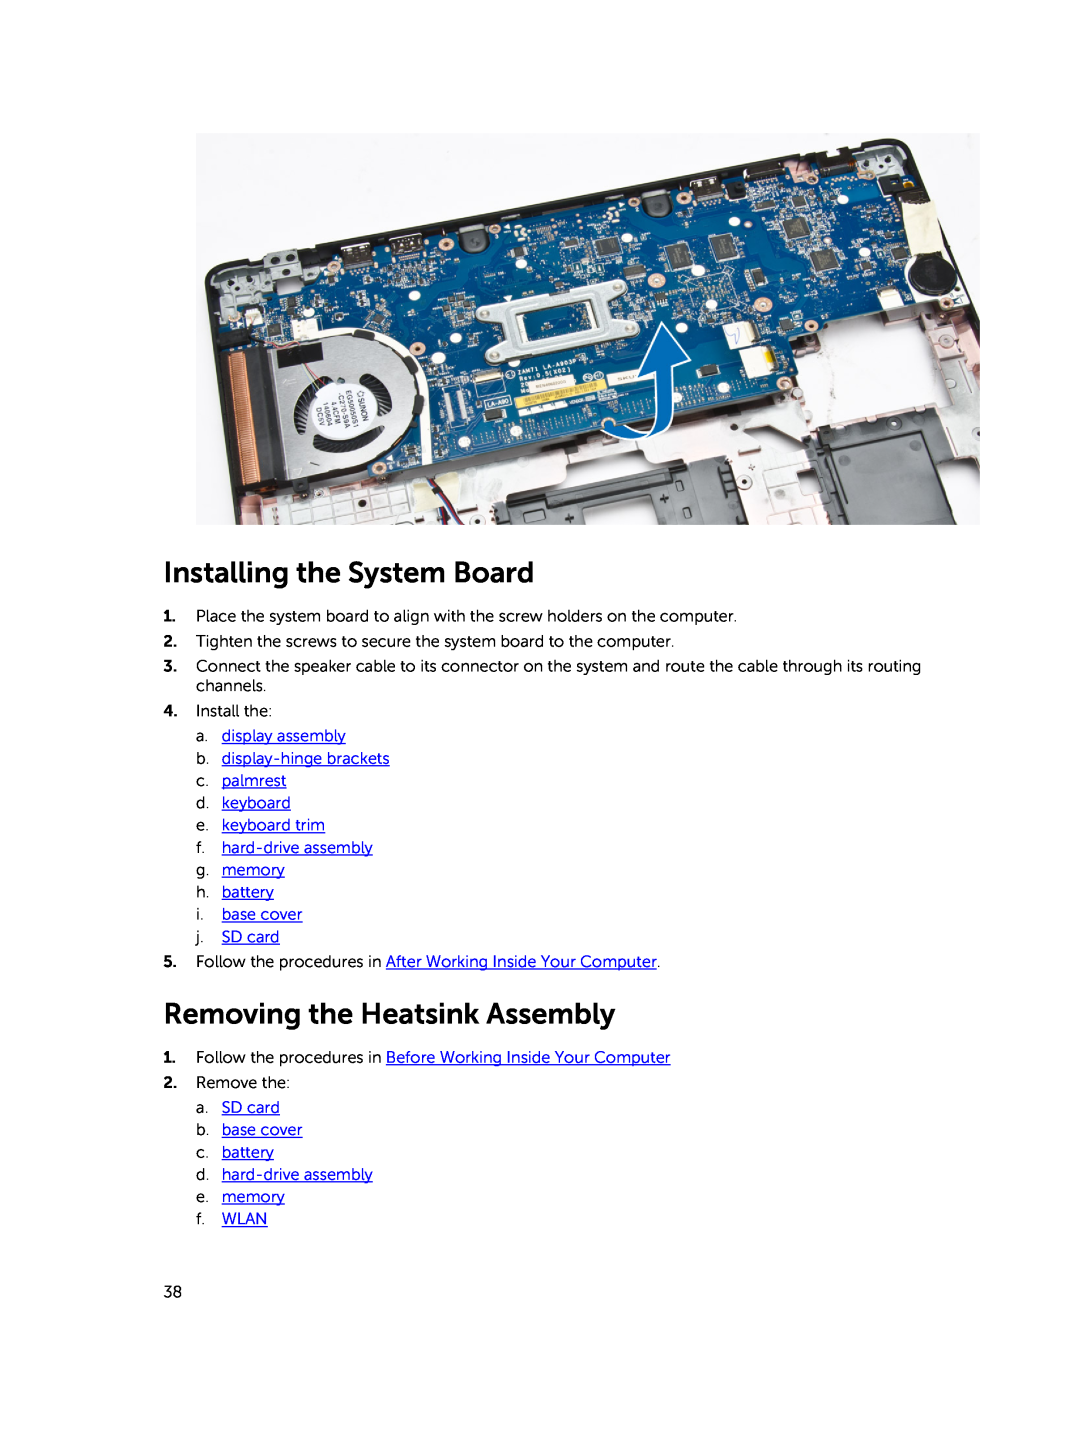 Dell E5450 owner manual Installing the System Board, Removing the Heatsink Assembly 